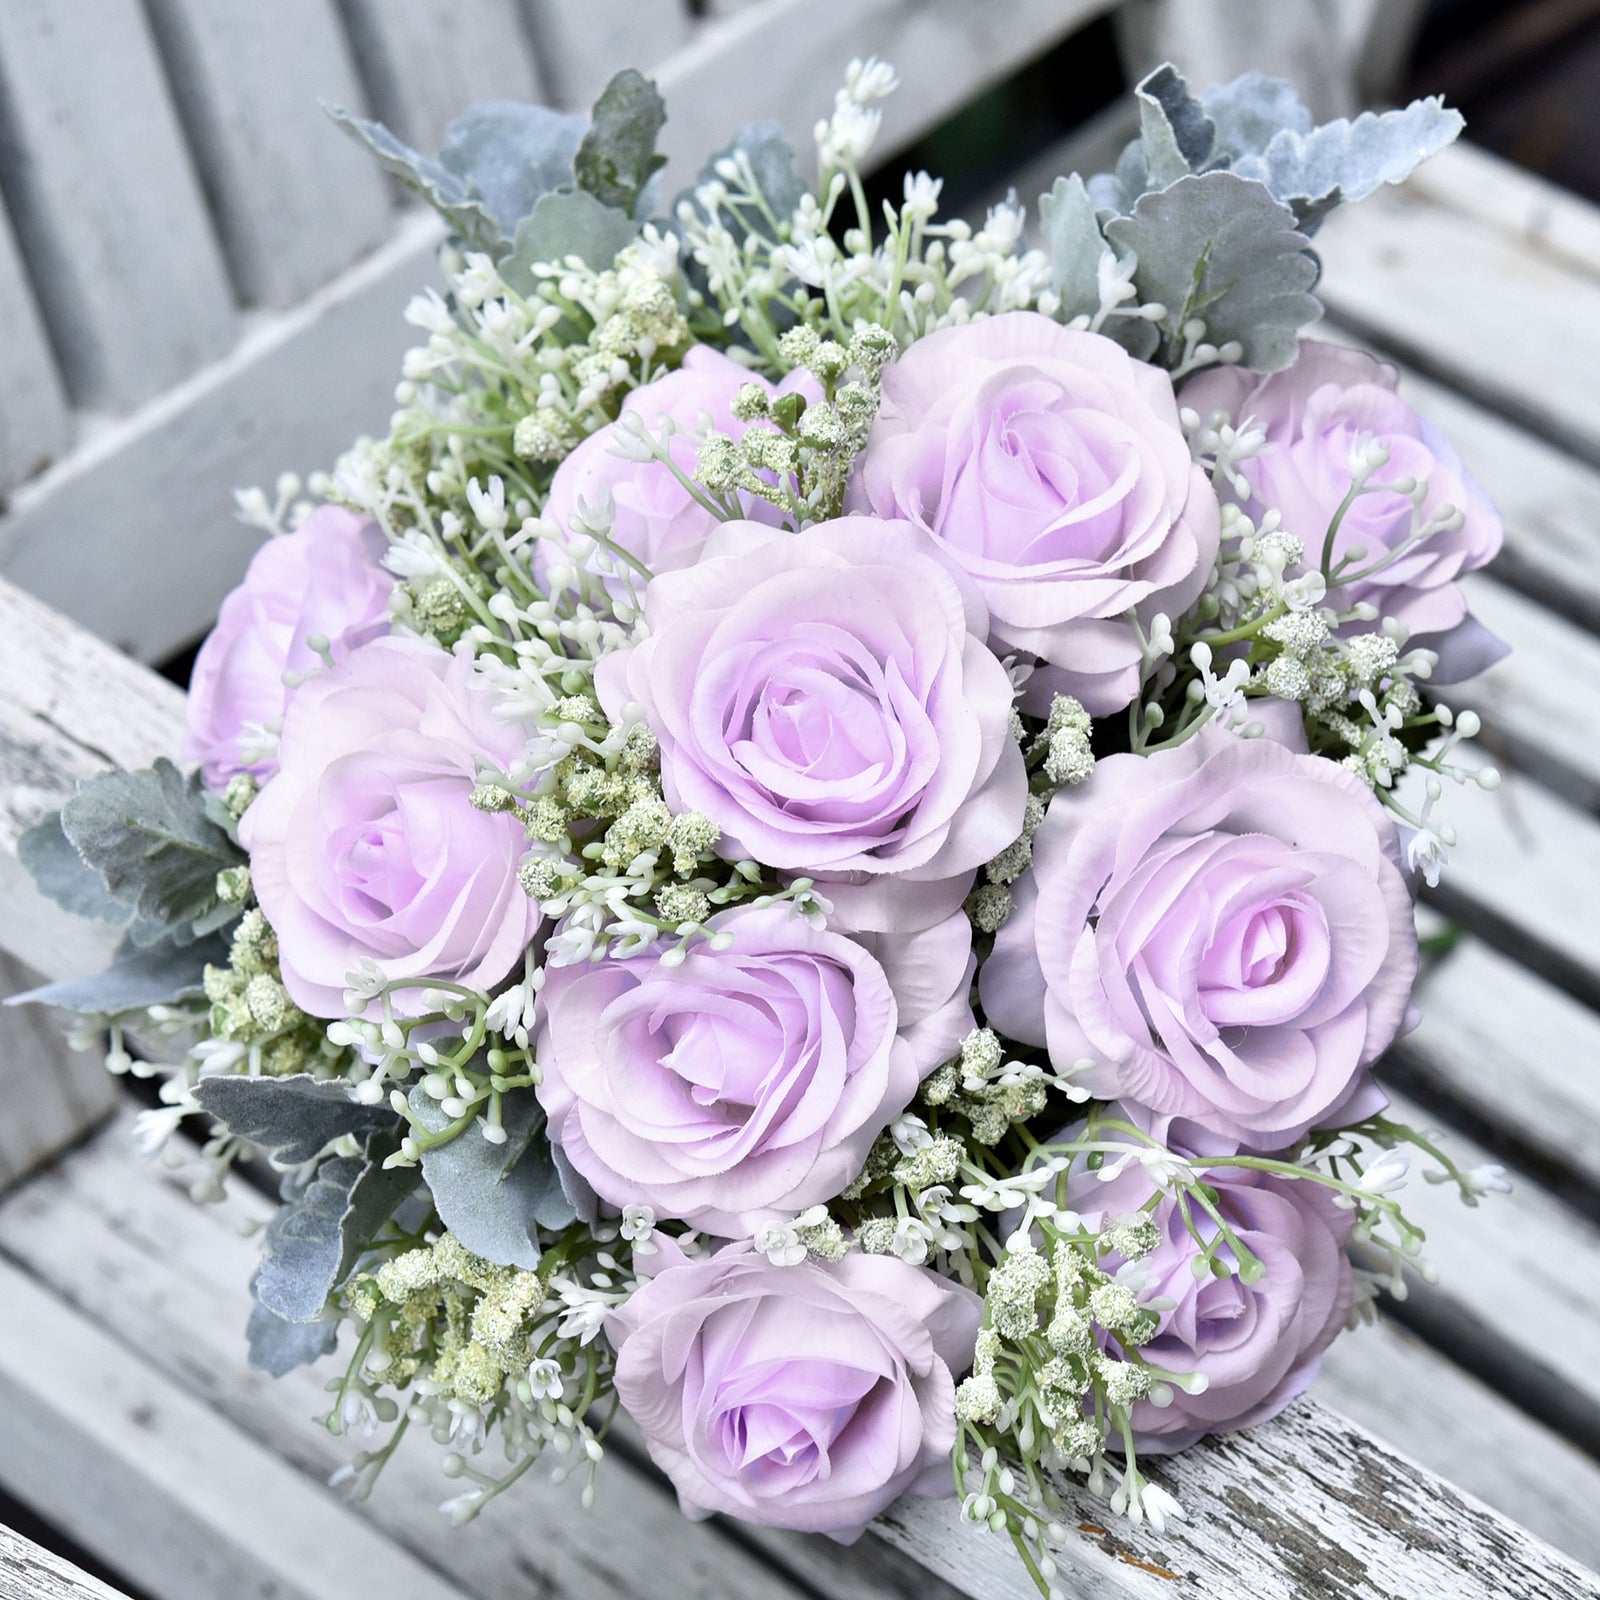 Real Touch 10 Stems "Pale Purple" Silk Artificial Roses Flowers ‘Petals Feel and Look like Fresh Roses'